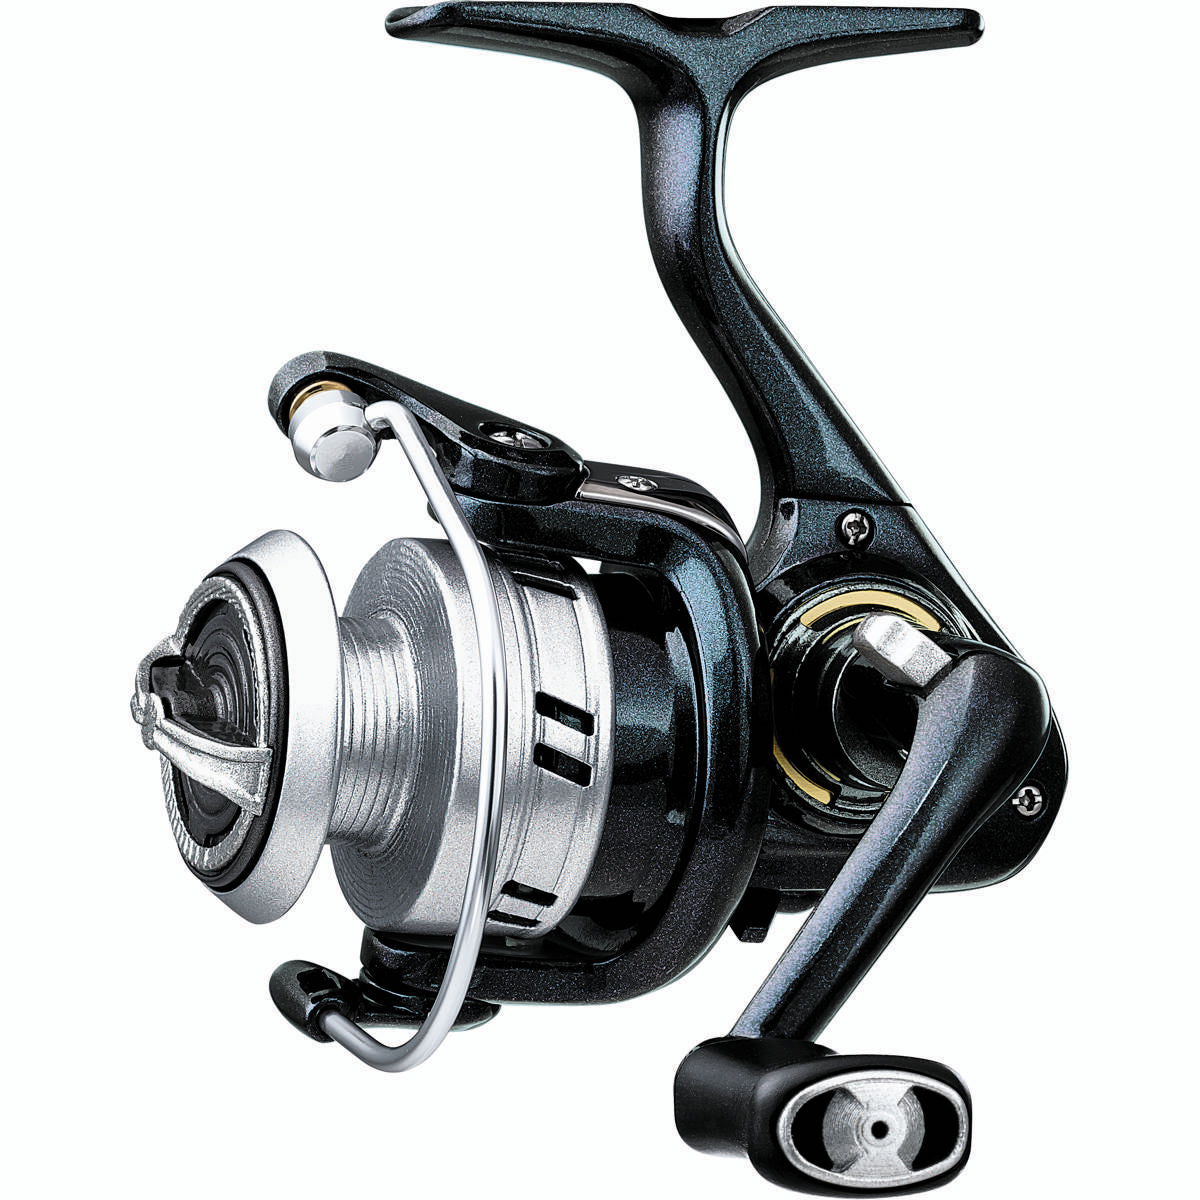 Photo of Daiwa QR Ultralight Spinning Reel for sale at United Tackle Shops.